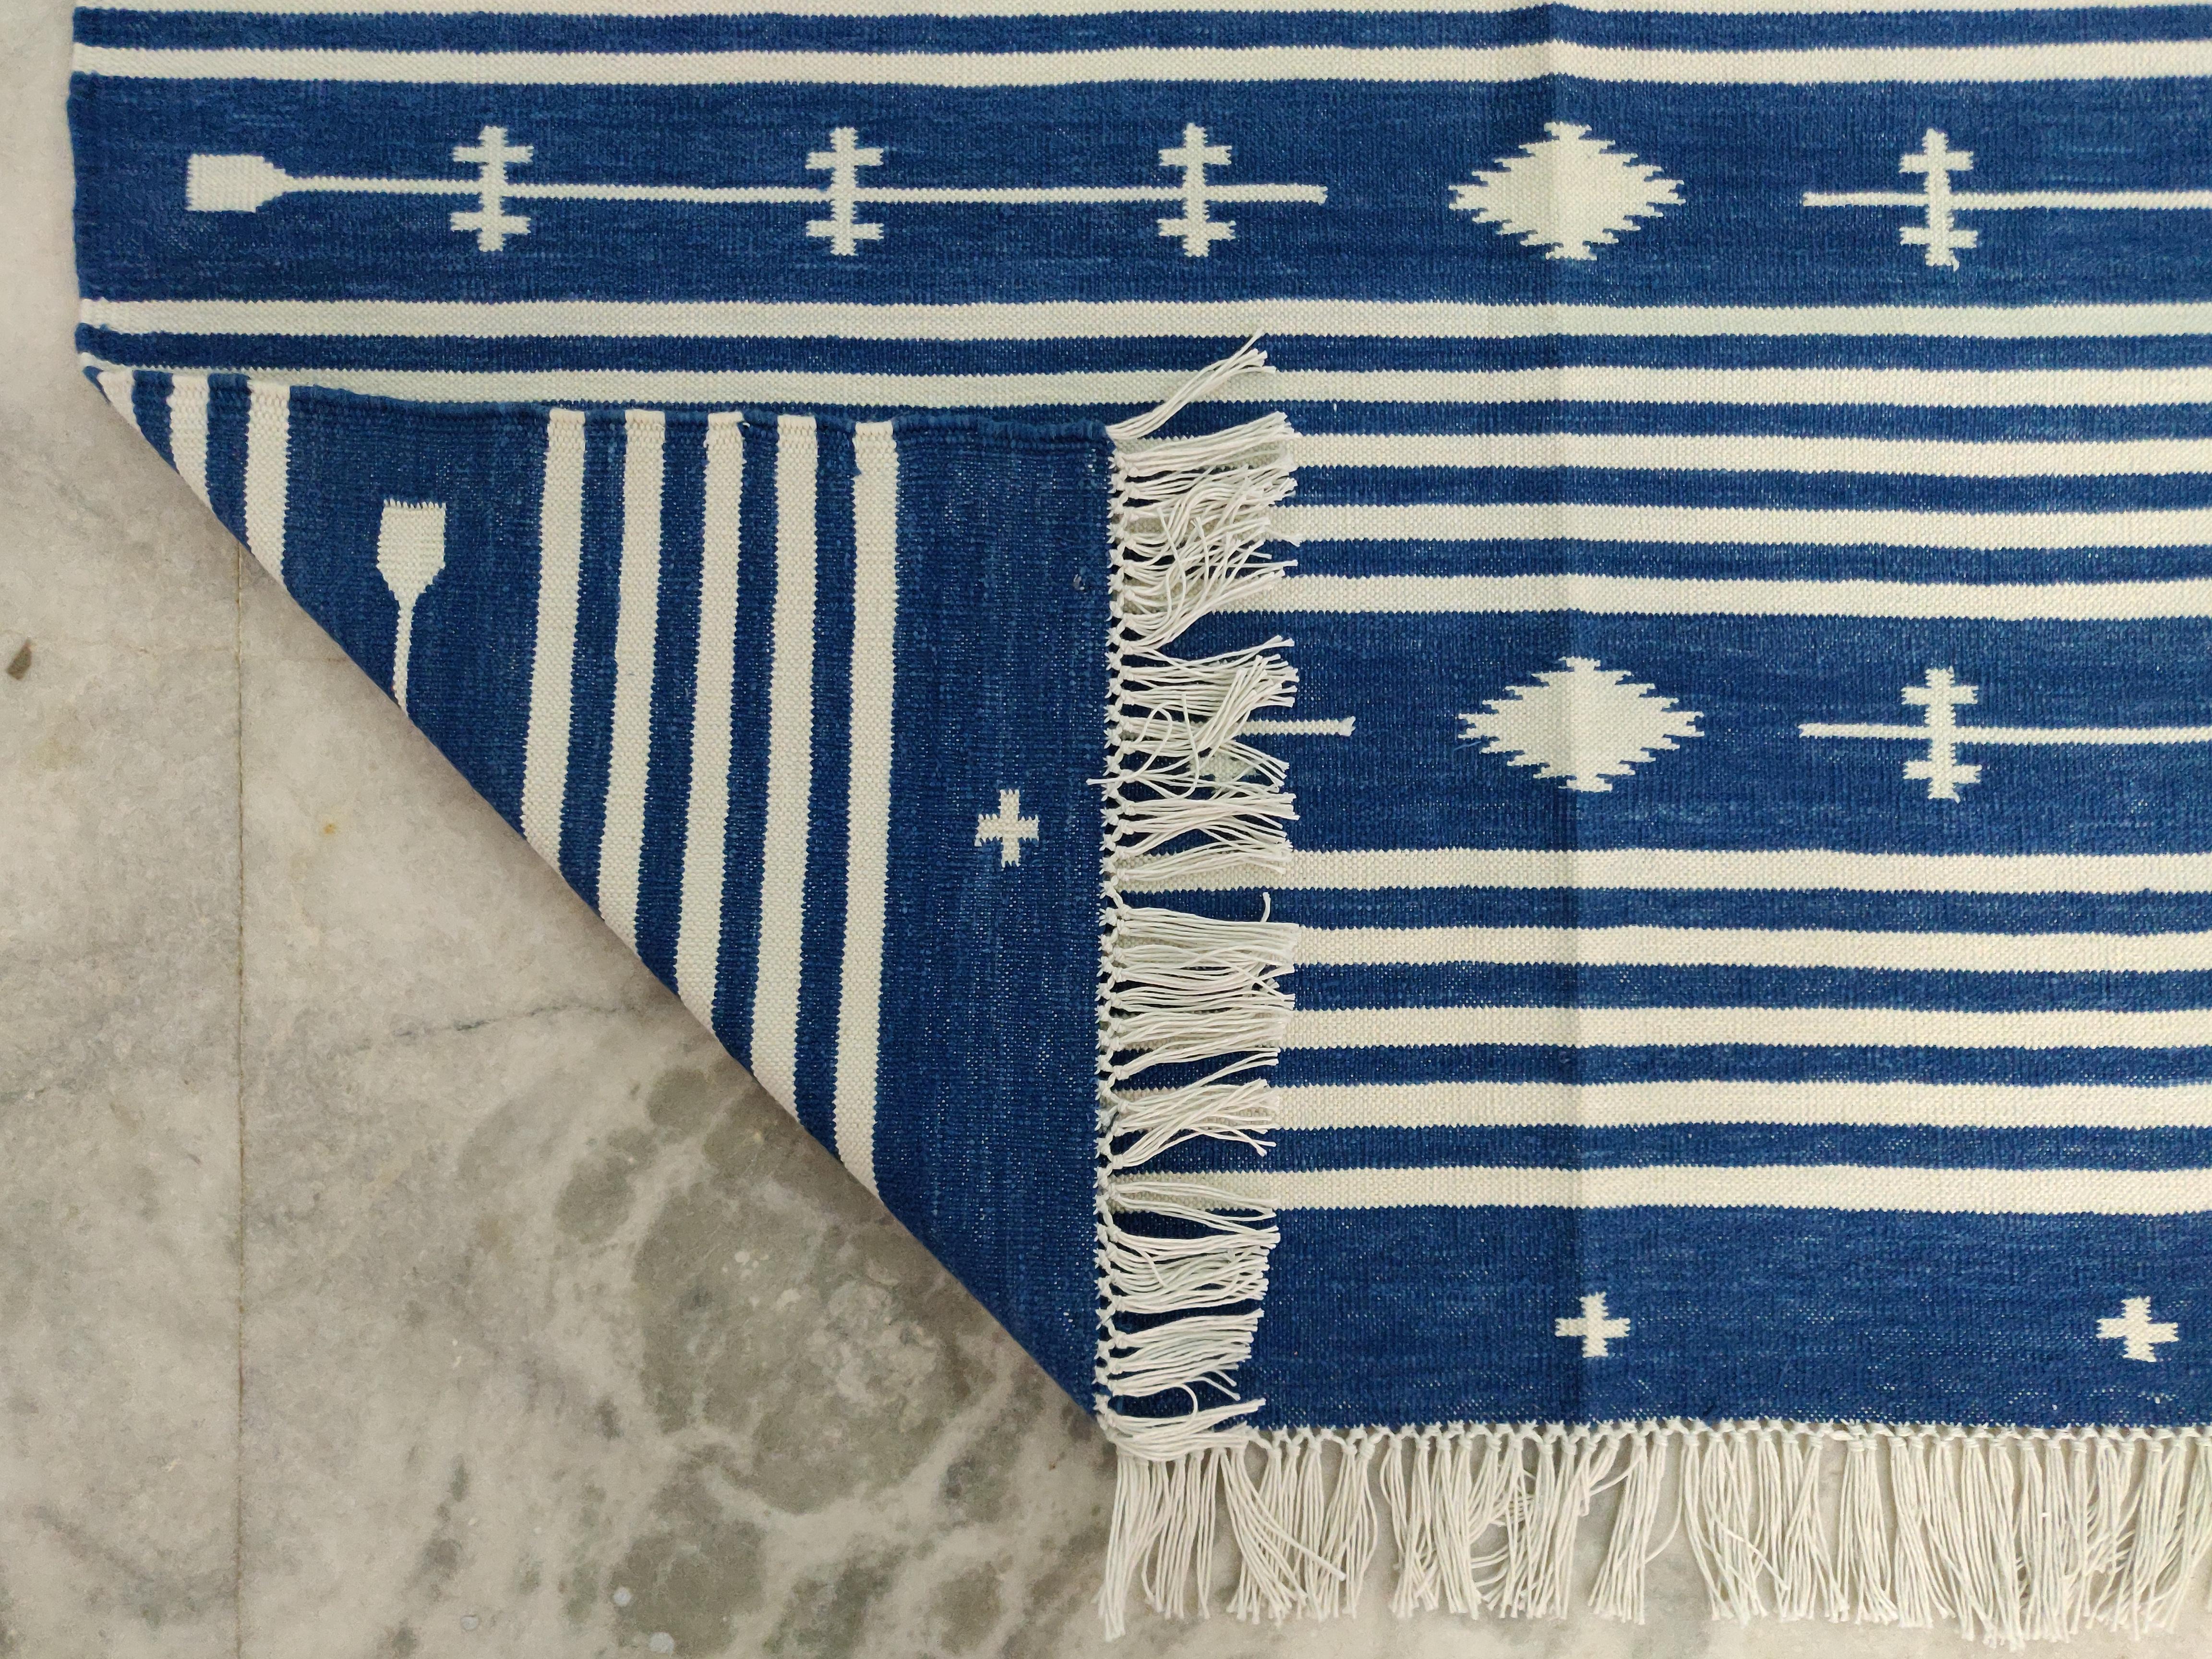 Handmade Cotton Area Flat Weave Rug, 3x5 Blue And White Striped Indian Dhurrie For Sale 2